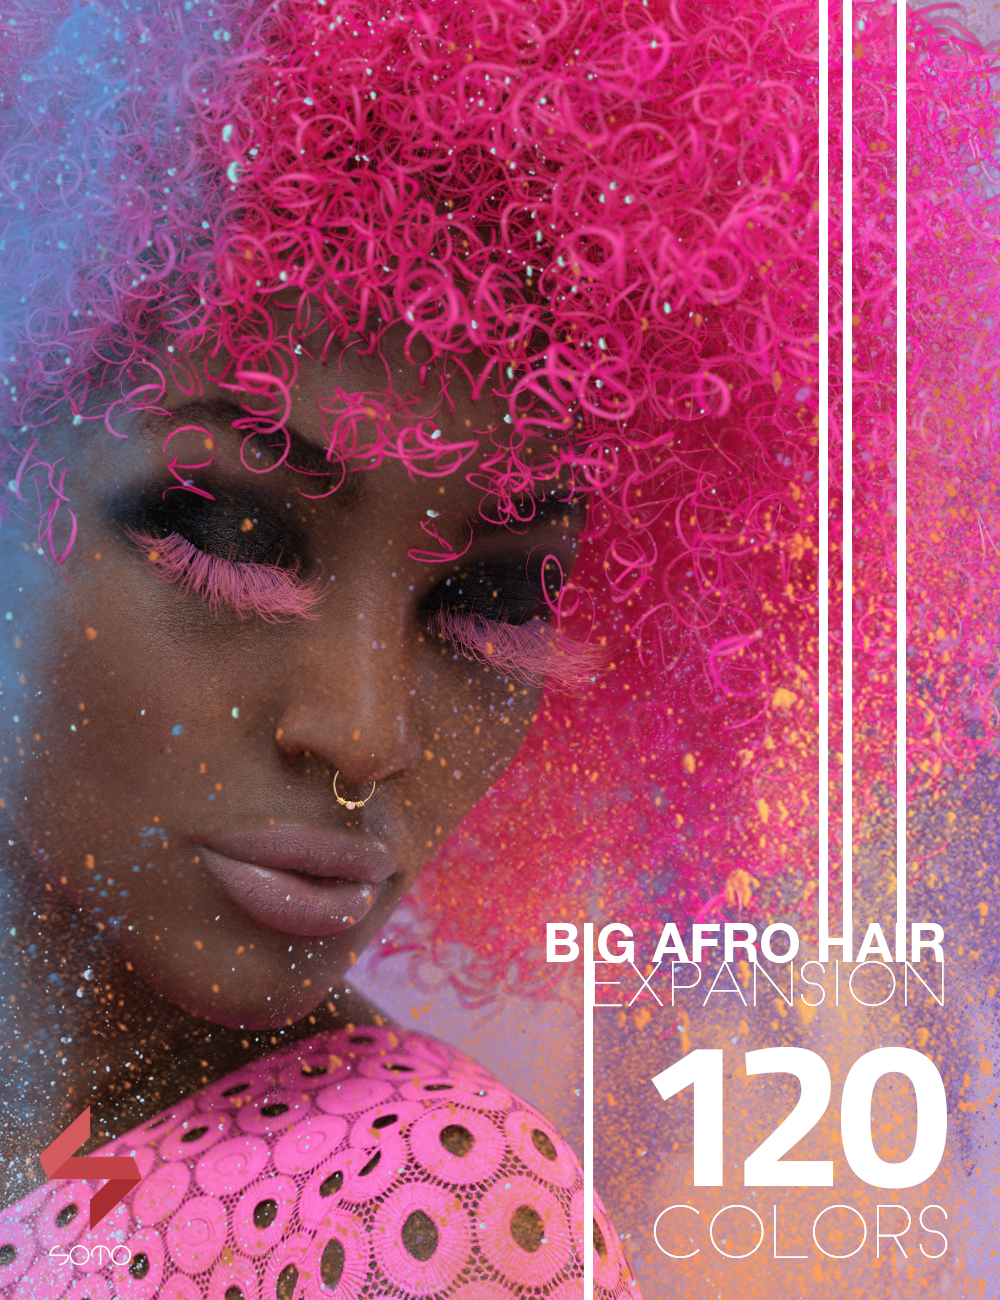 Big Afro Hair Expansion by: Soto, 3D Models by Daz 3D